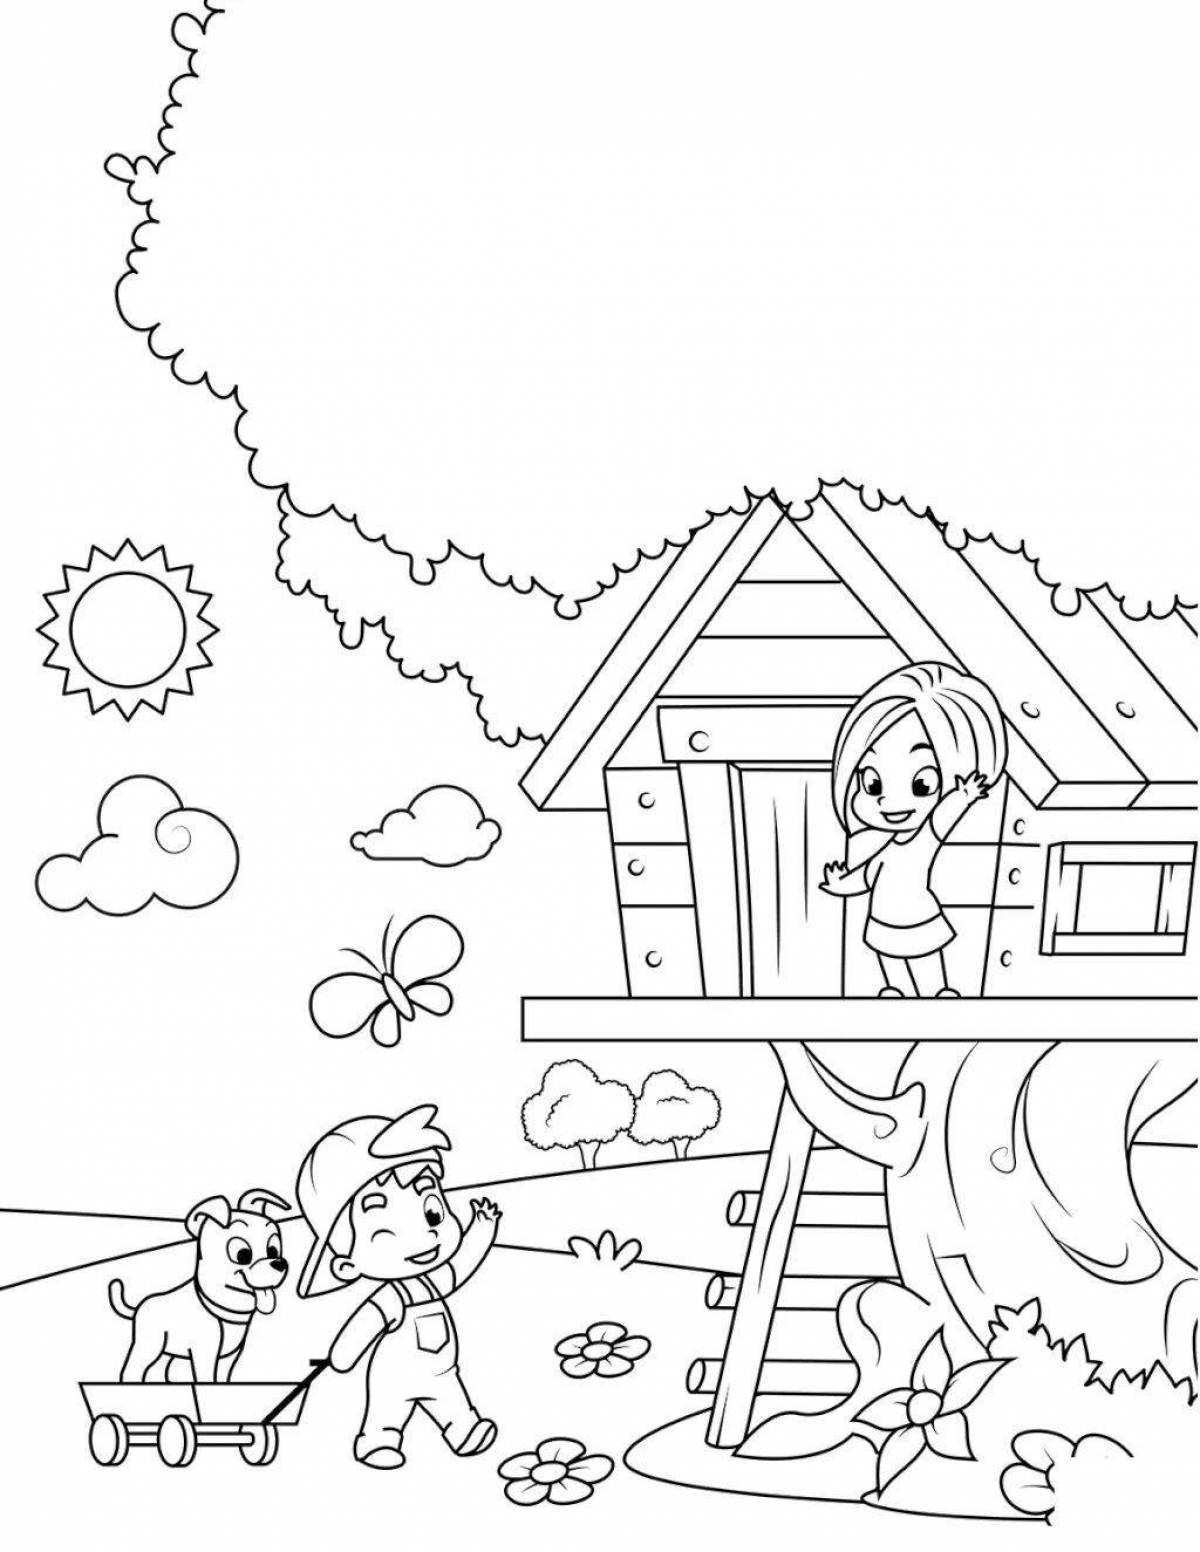 Glorious yard coloring pages for kids